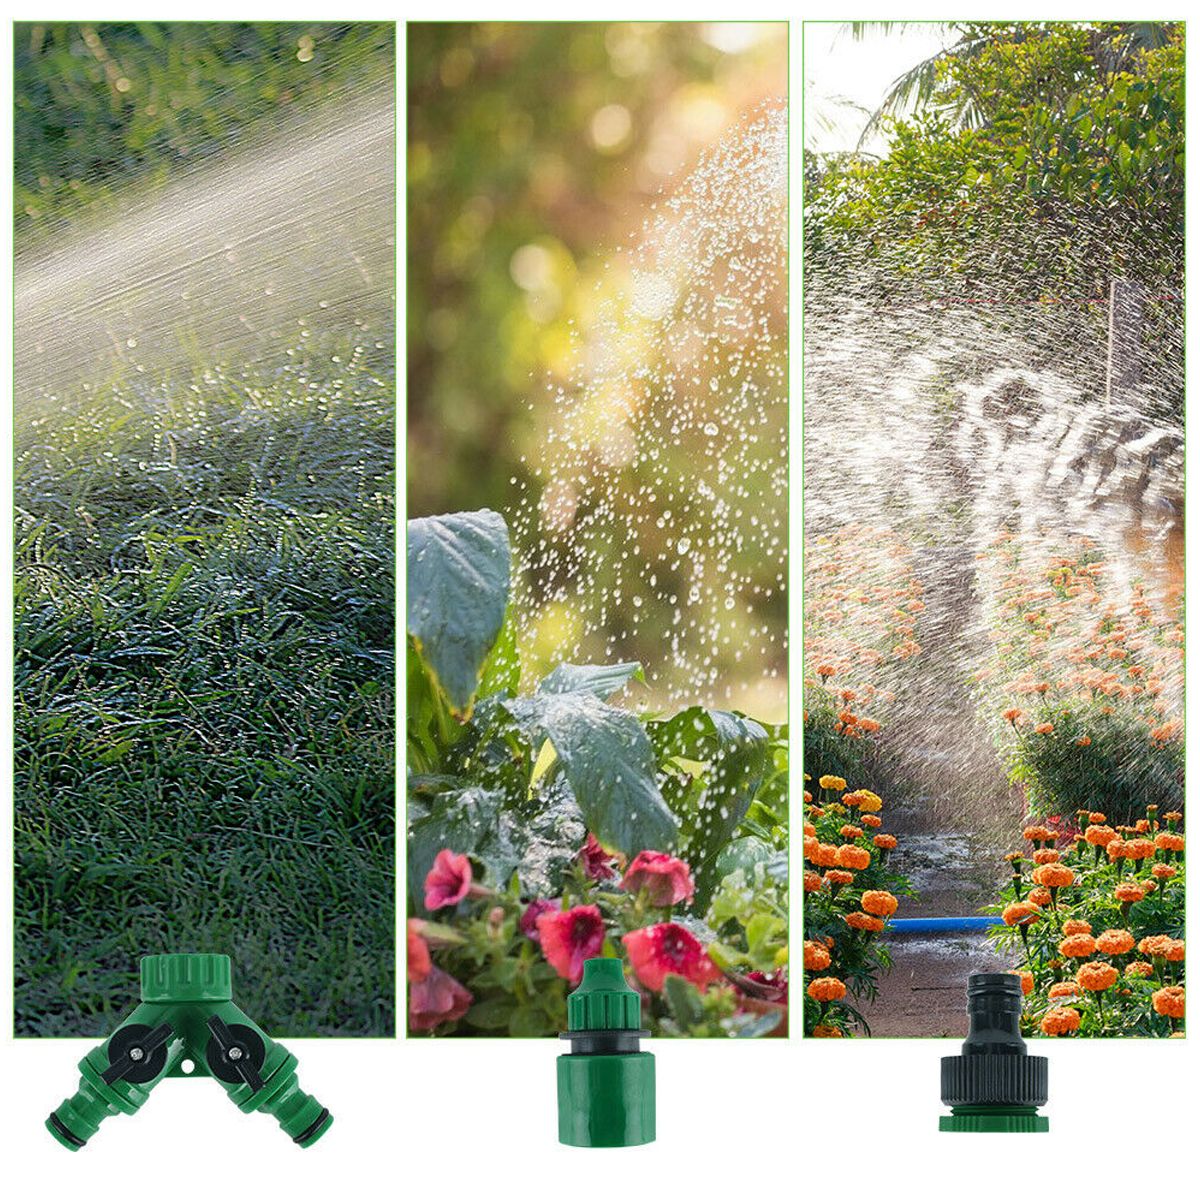 30M-100FT-Micro-Drip-Irrigation-System-Auto-Watering-Plant-Timer-Garden-Hose-Kit-1736315